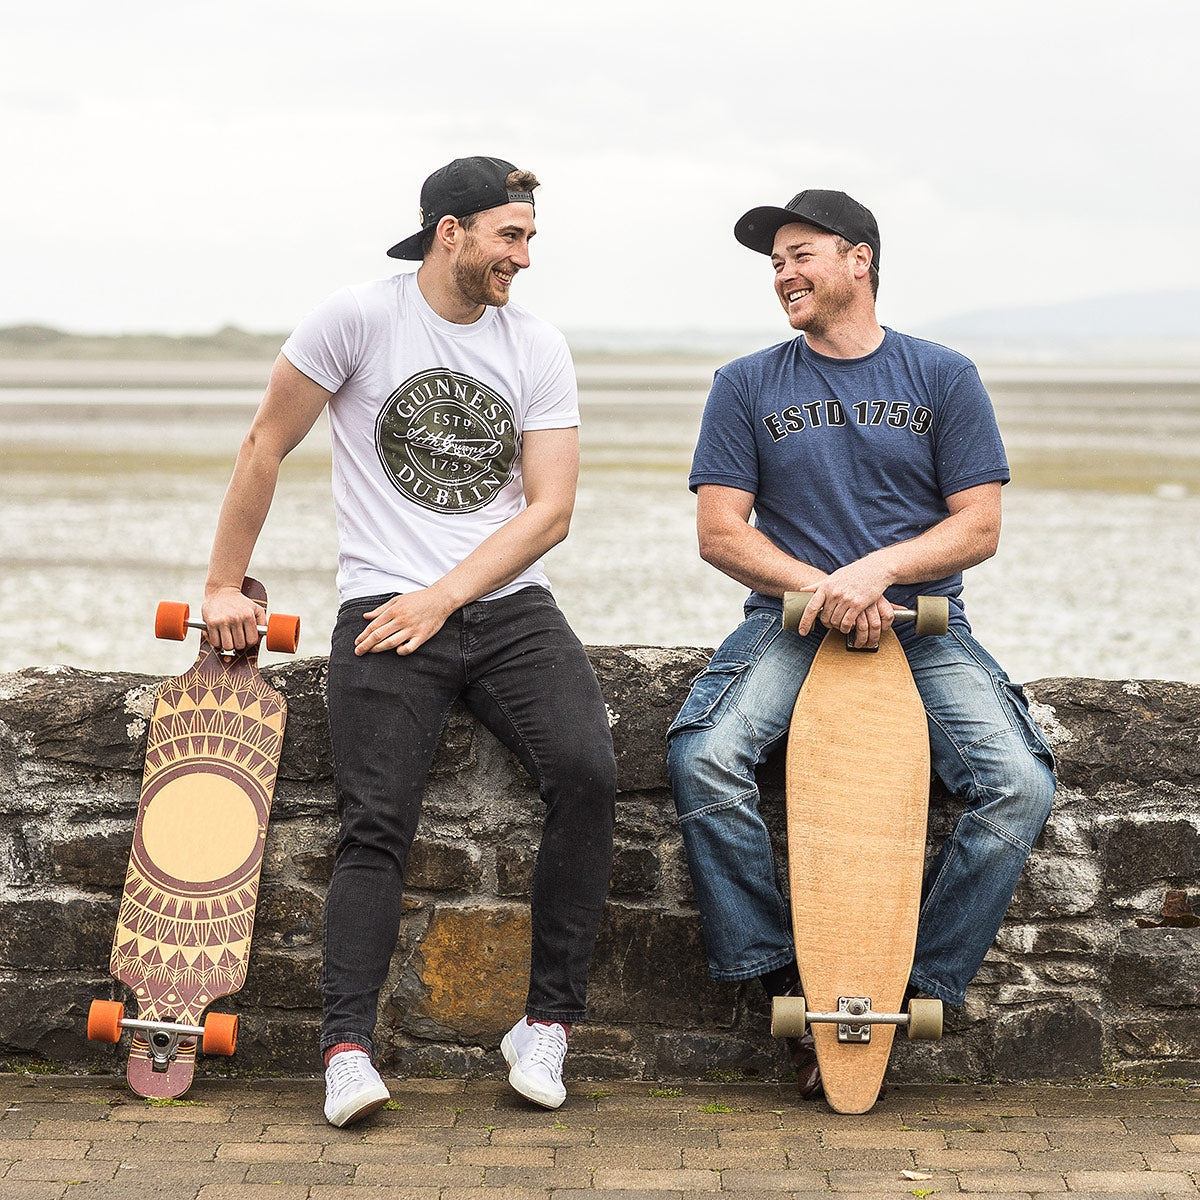 Two men sitting on a wall with their skateboards, wearing Guinness UK's Navy Heathered EST 1759 T-Shirts.